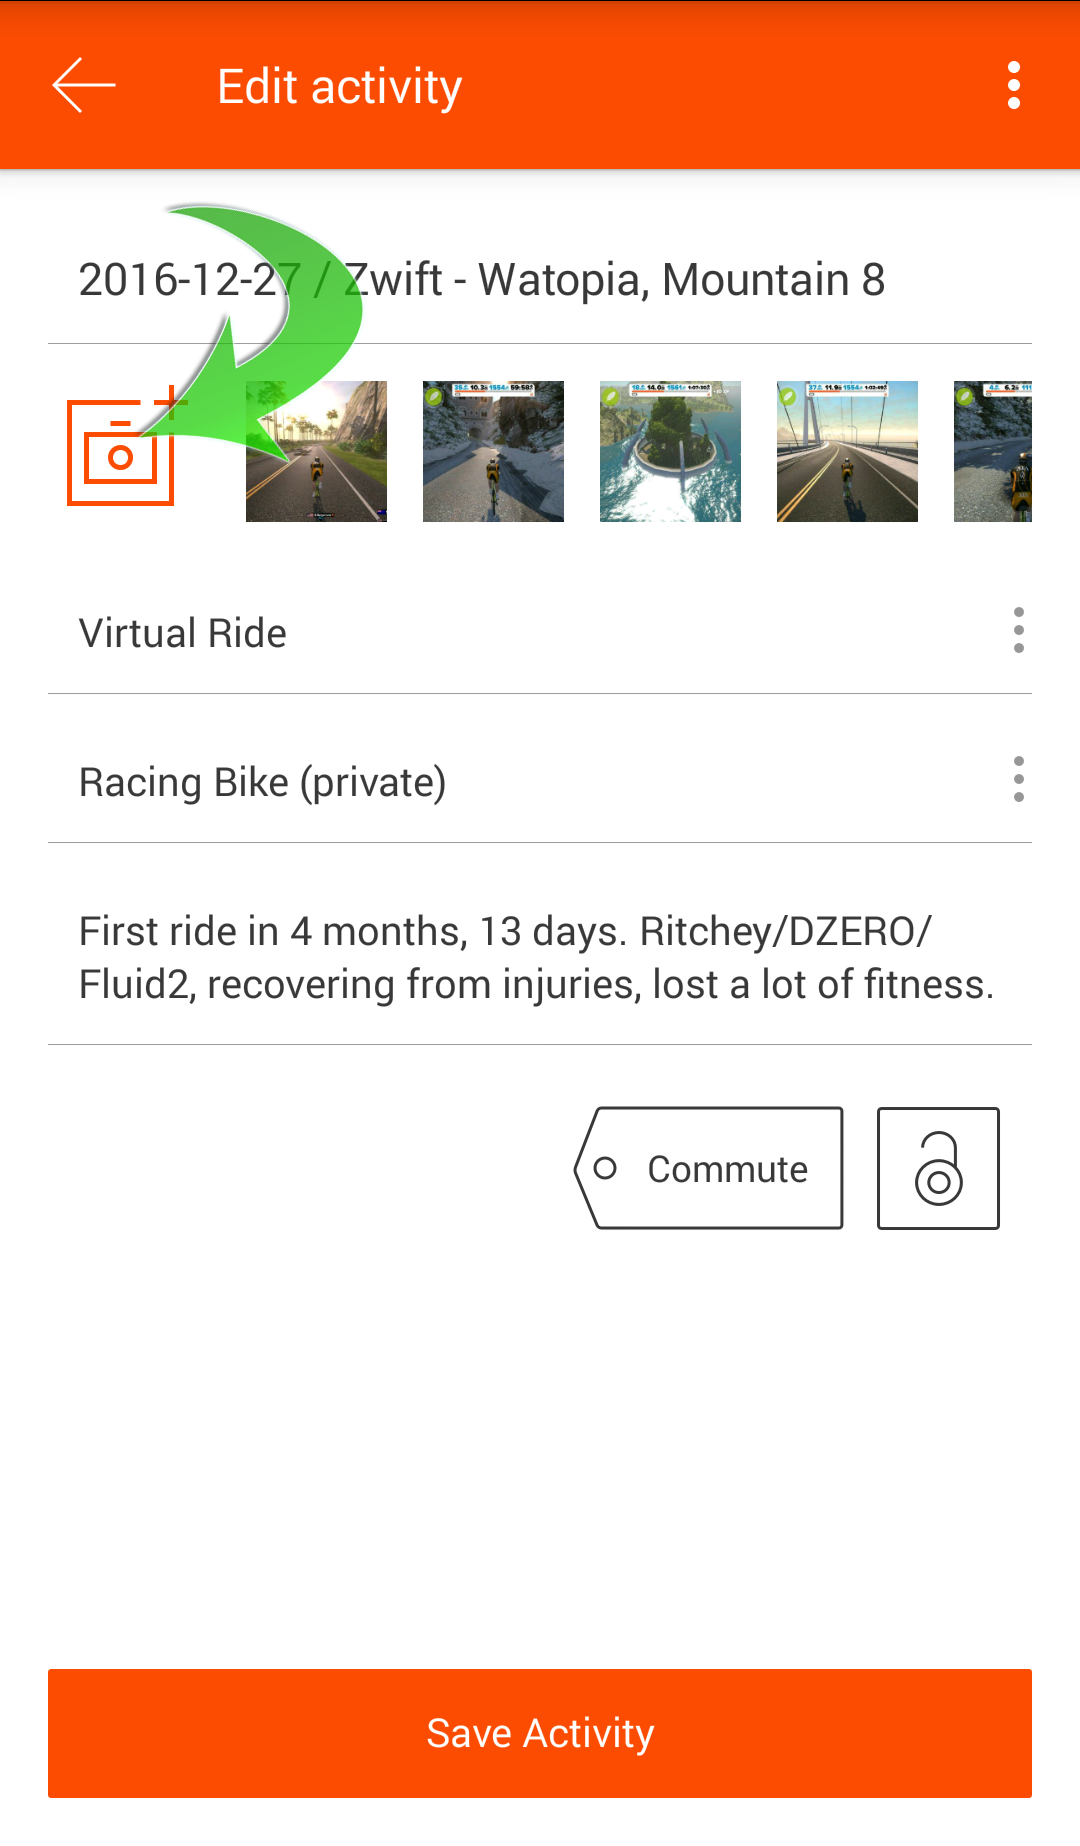 Adding custom images to your Strava activity